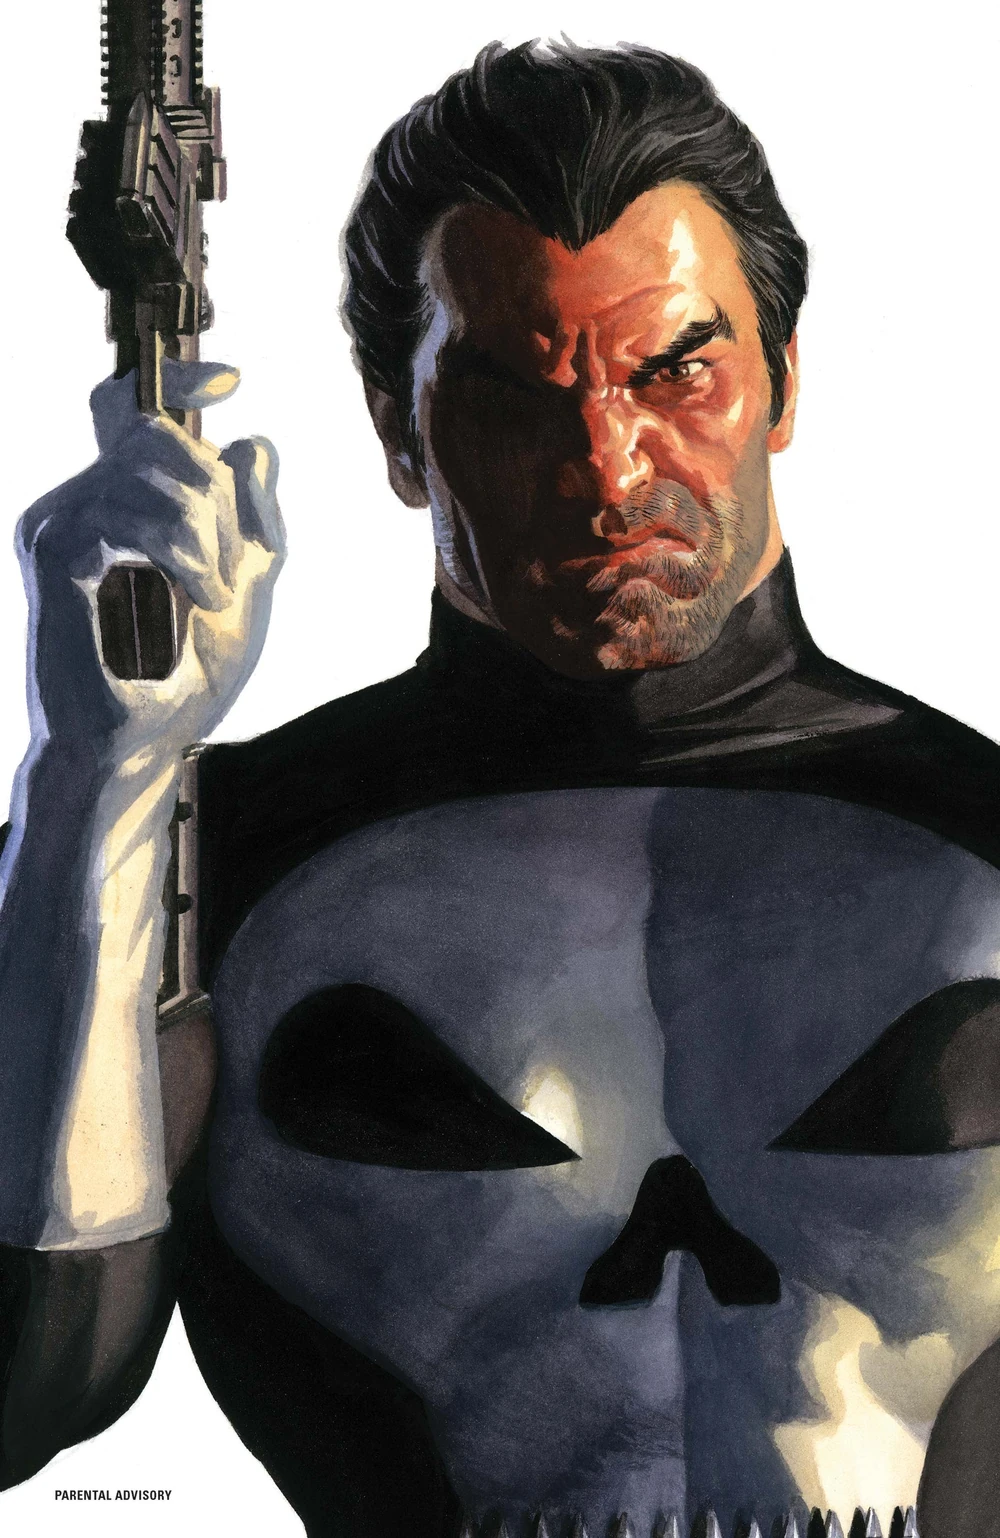 Frank Castle is locked and loaded on Alex Ross' Timeless variant cover to Punisher Vol. 13 #1 "The King of Killers - Book One, Chapter One: The Blessings of War" (2022), Marvel Comics